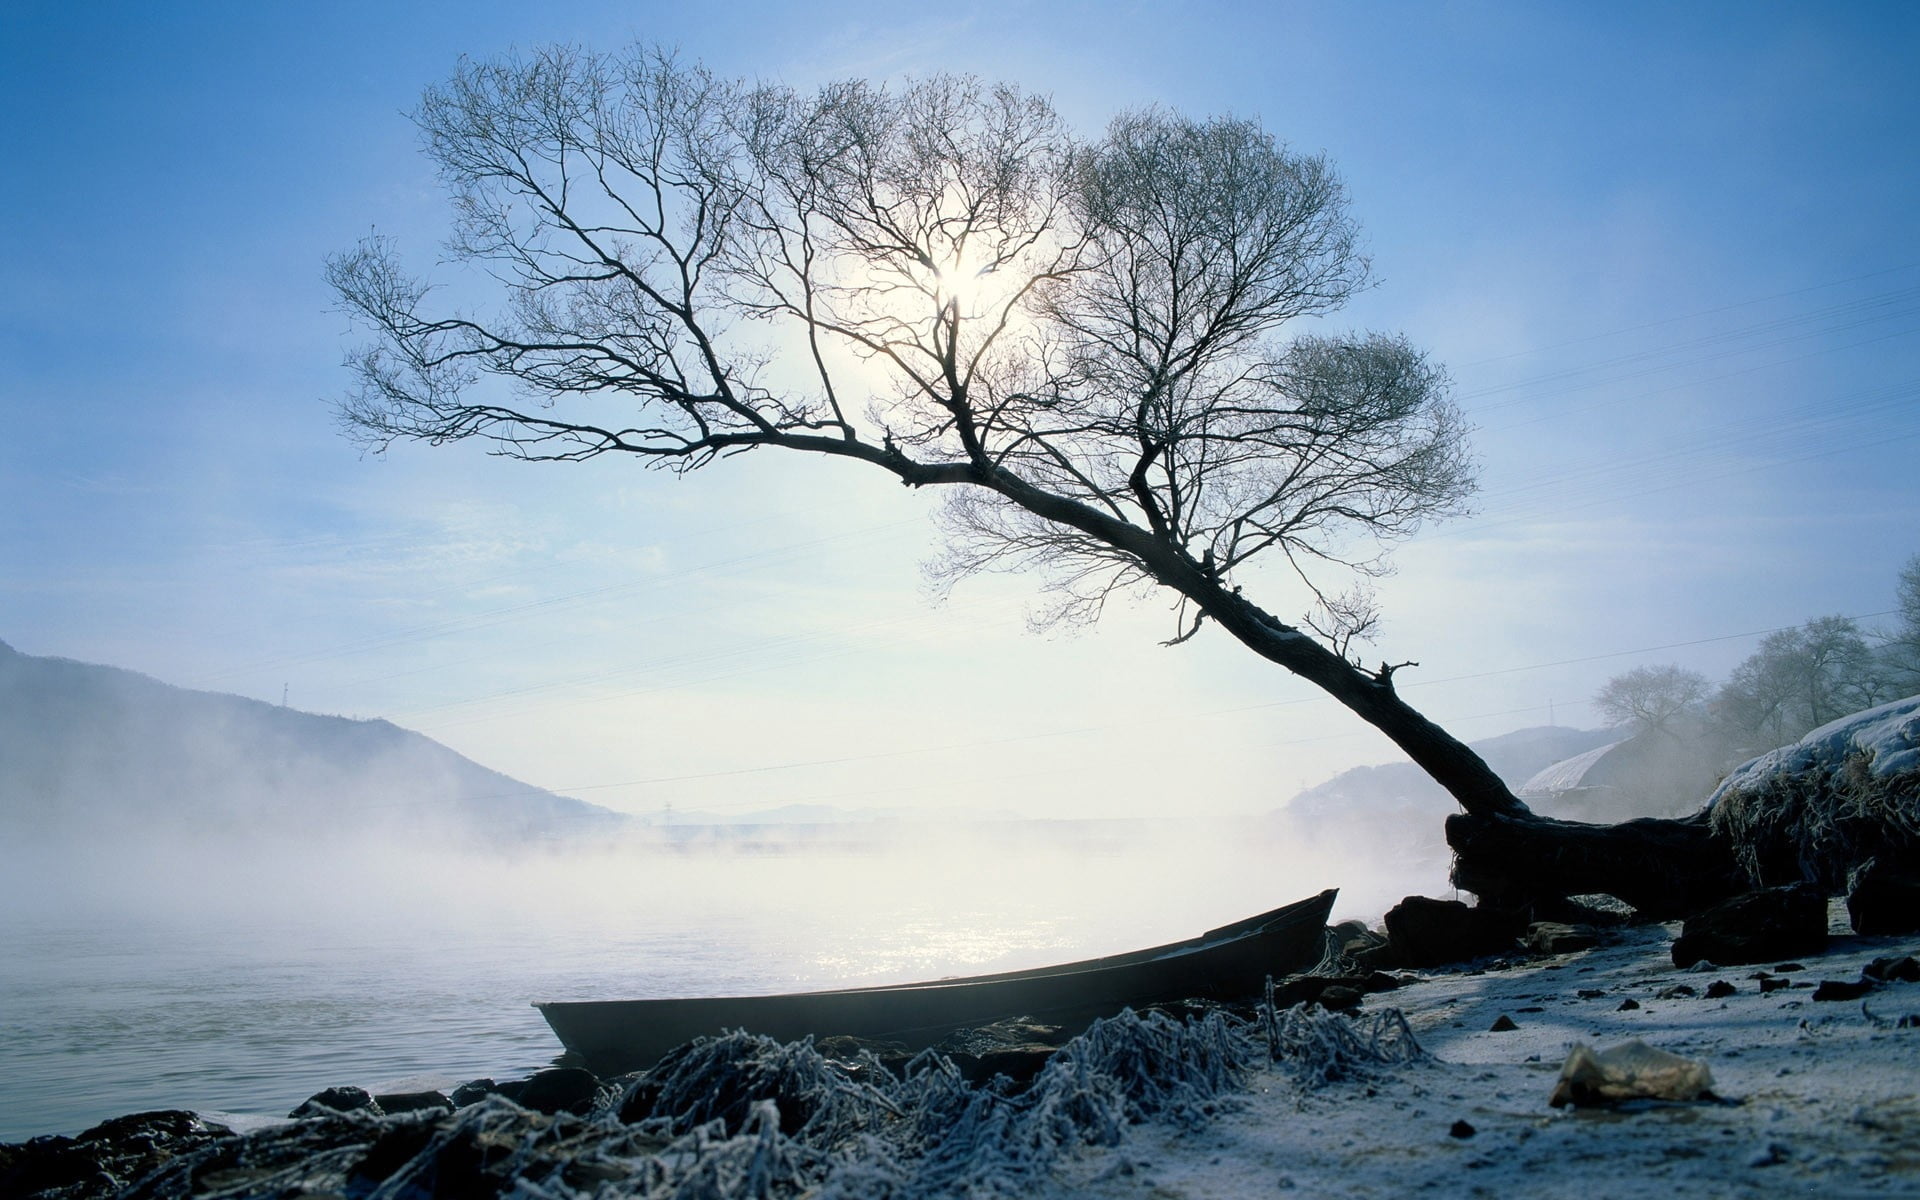 black leafed tree and body of water, boat, coast, fog, sun, branches